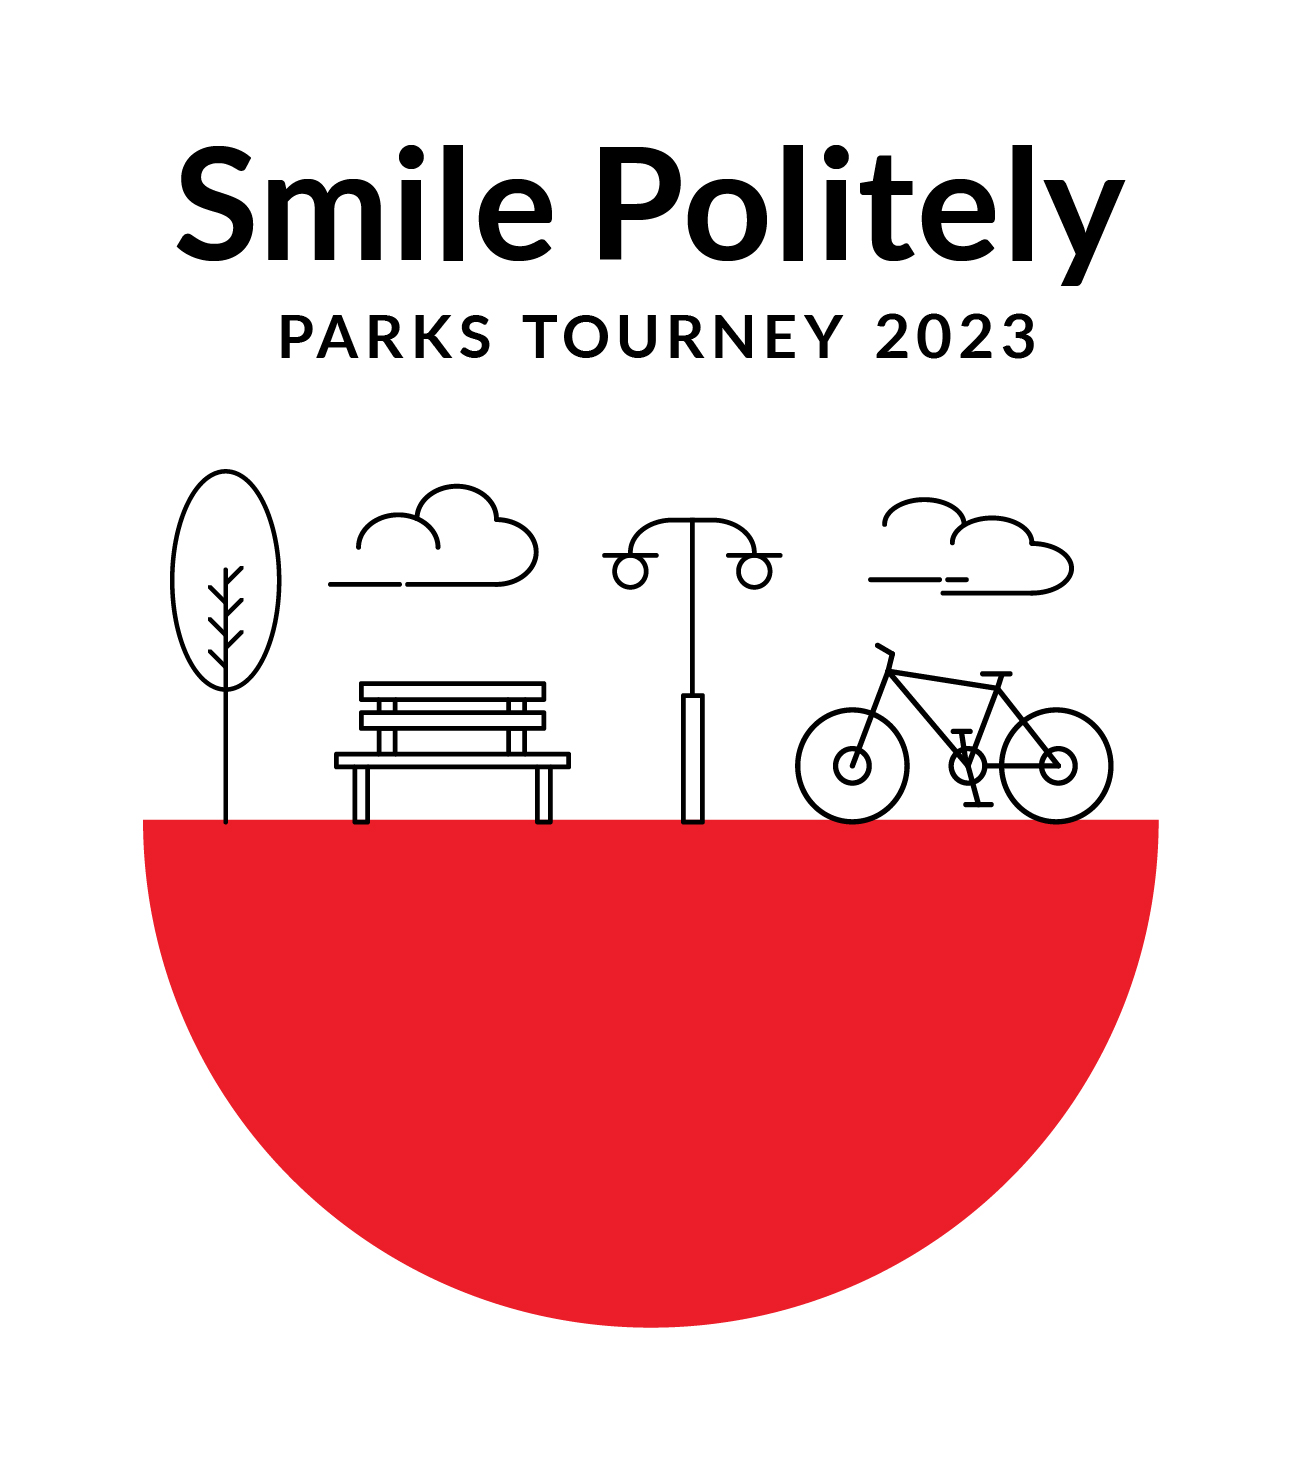 Graphic "Smile Politely Parks Tourney 2023" in black text on white background. Black line drawings of trees, benches, lamppost, and bicycle sit atop a red semicircle.